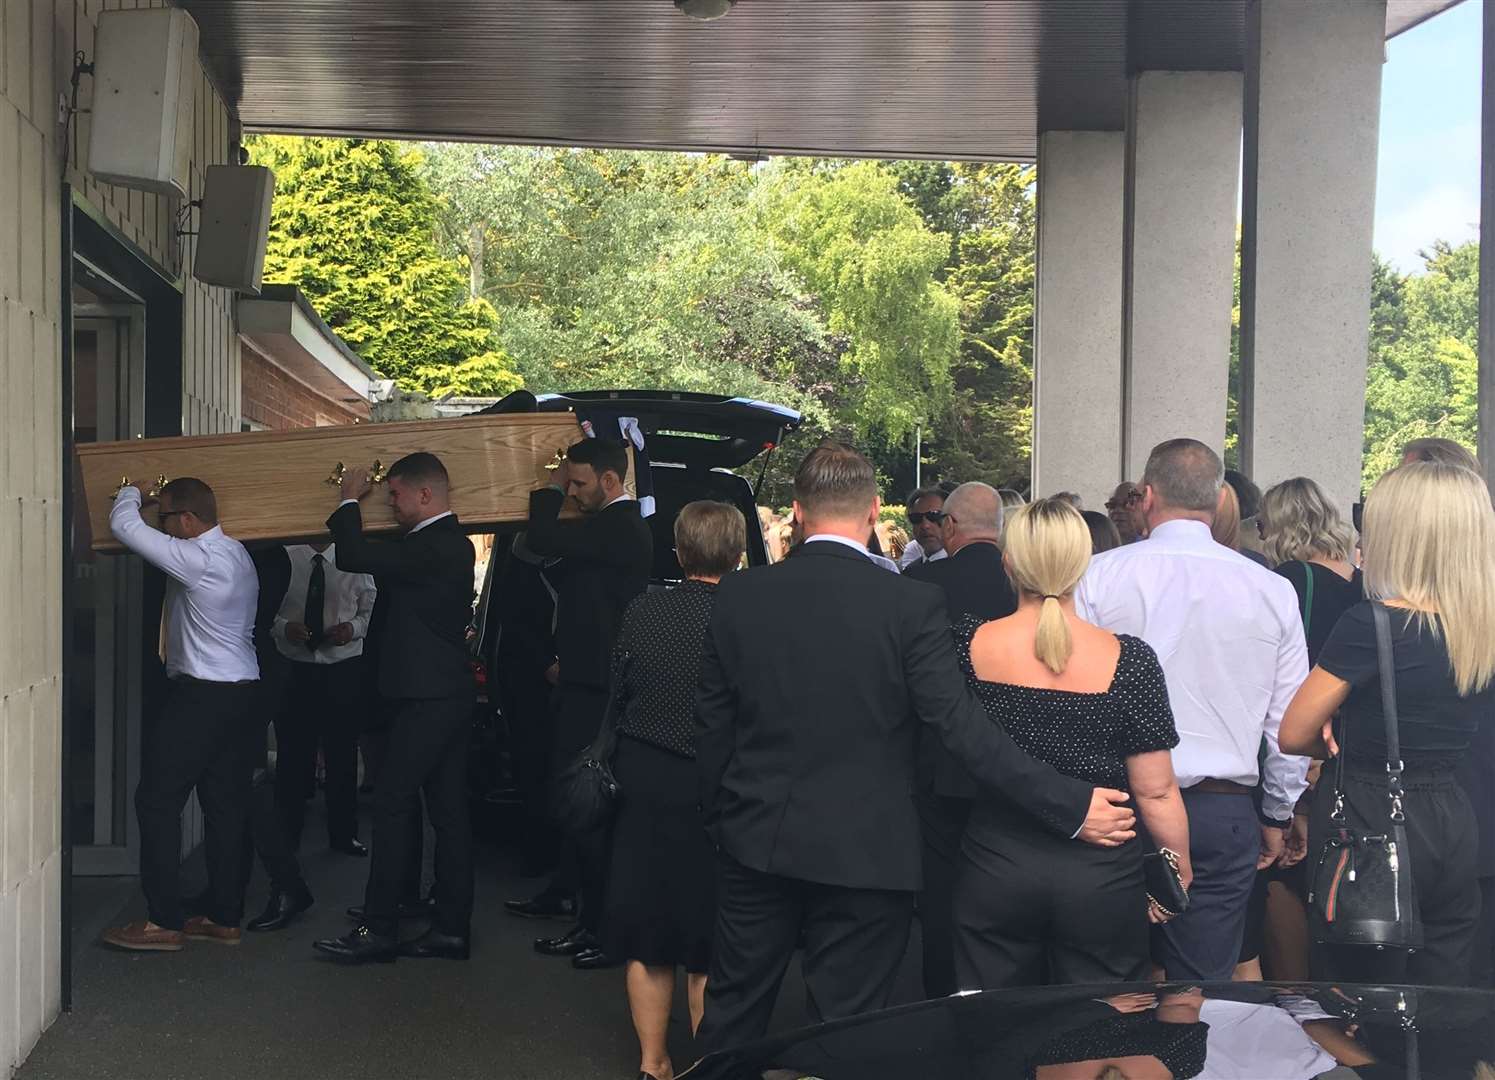 Mr Stone's brothers carried in his coffin to the chapel